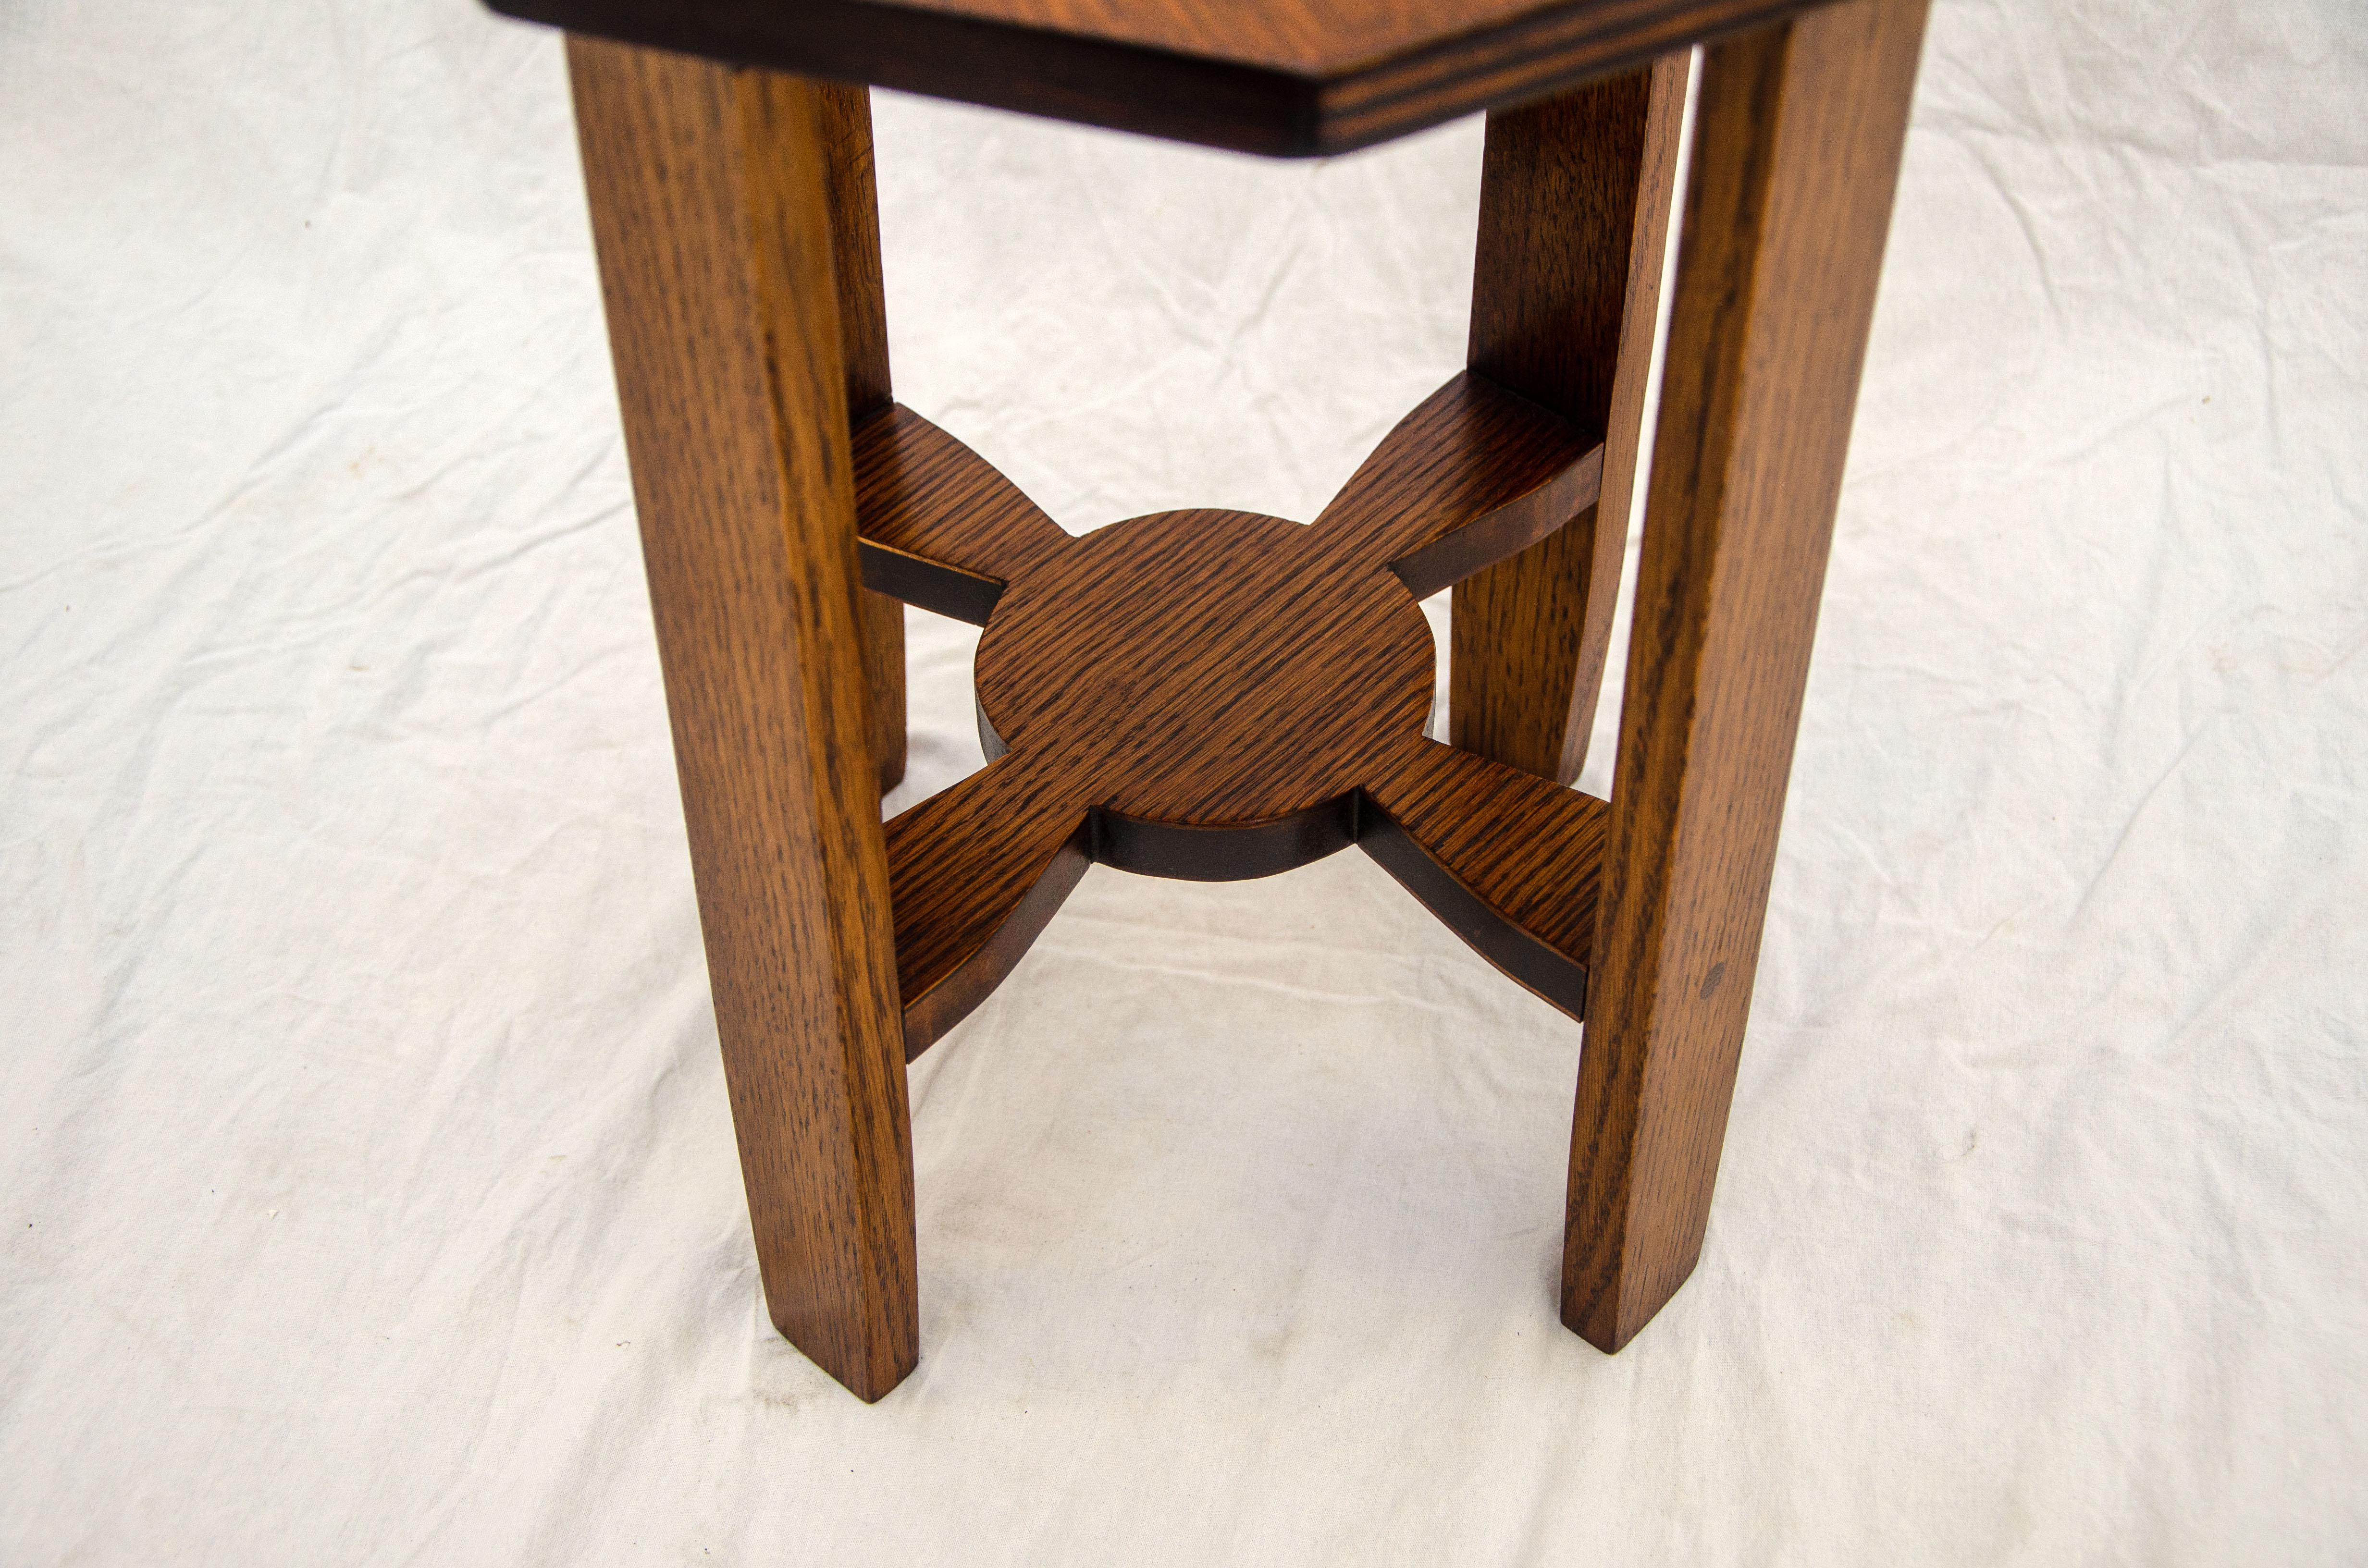 20th Century Small Arts & Crafts Style Oak Plant Stand / Table